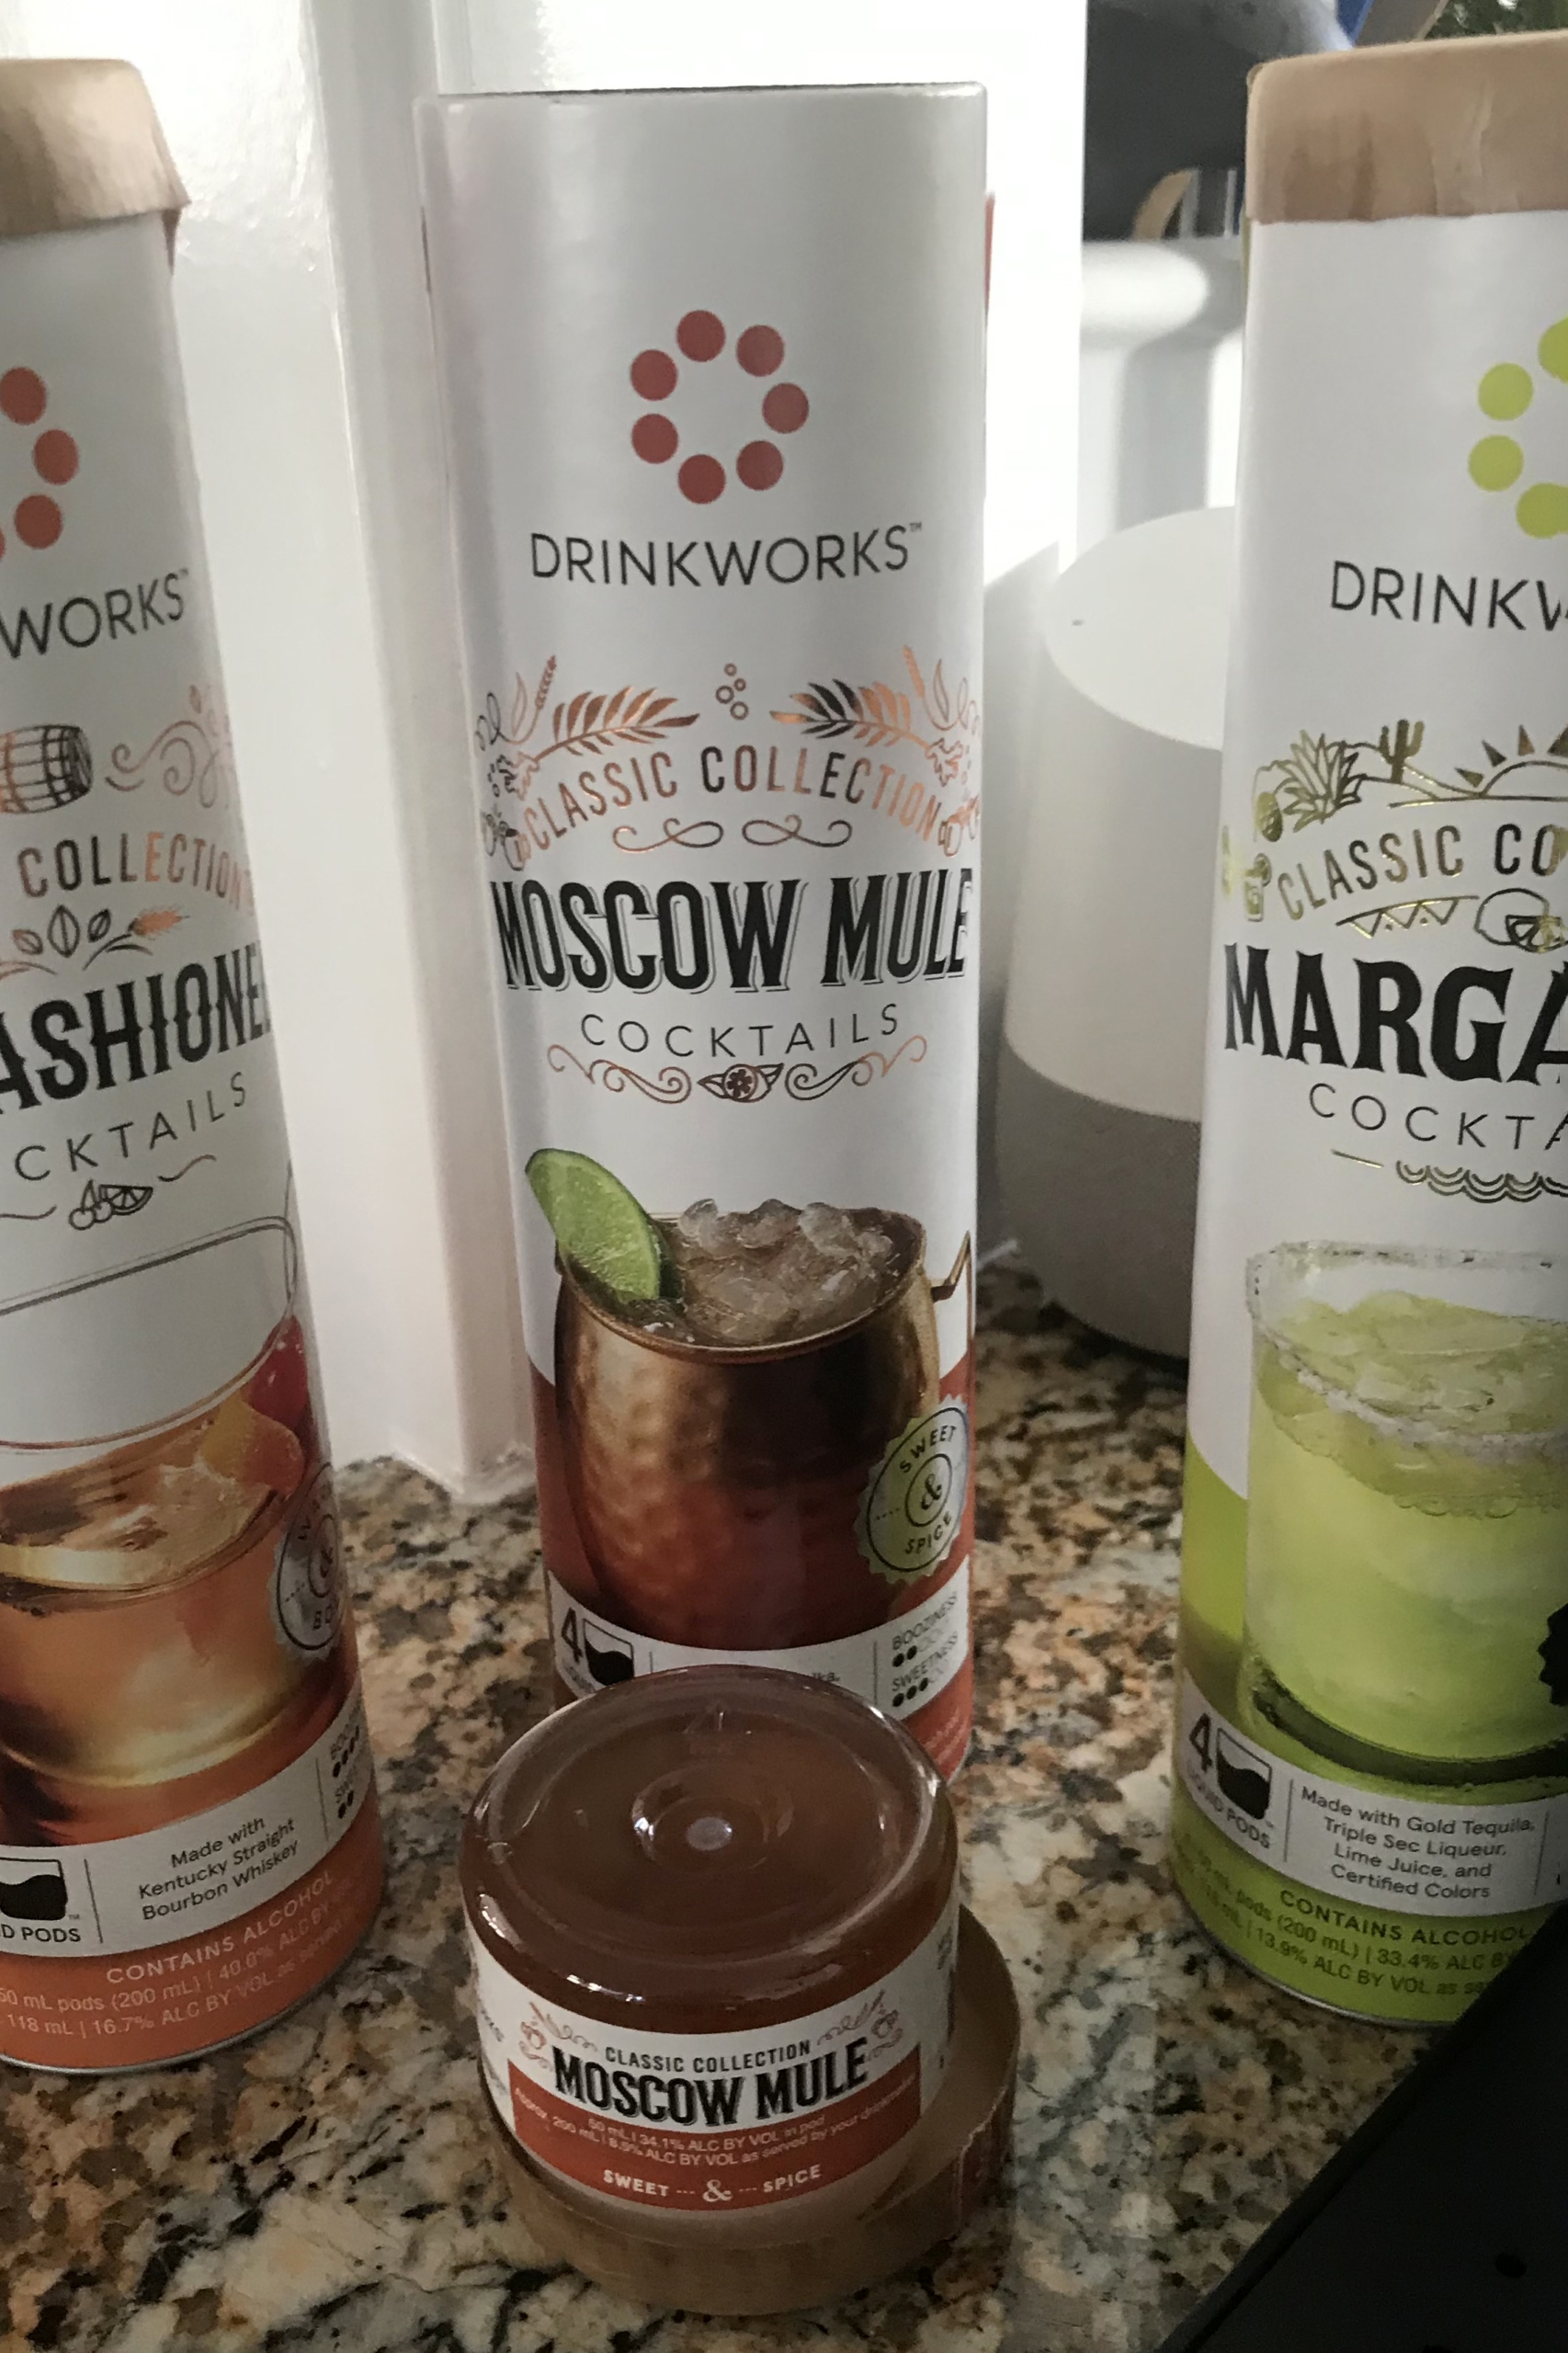 Is the Drinkworks Home Bar by Keurig Worth Buying? - My Review and